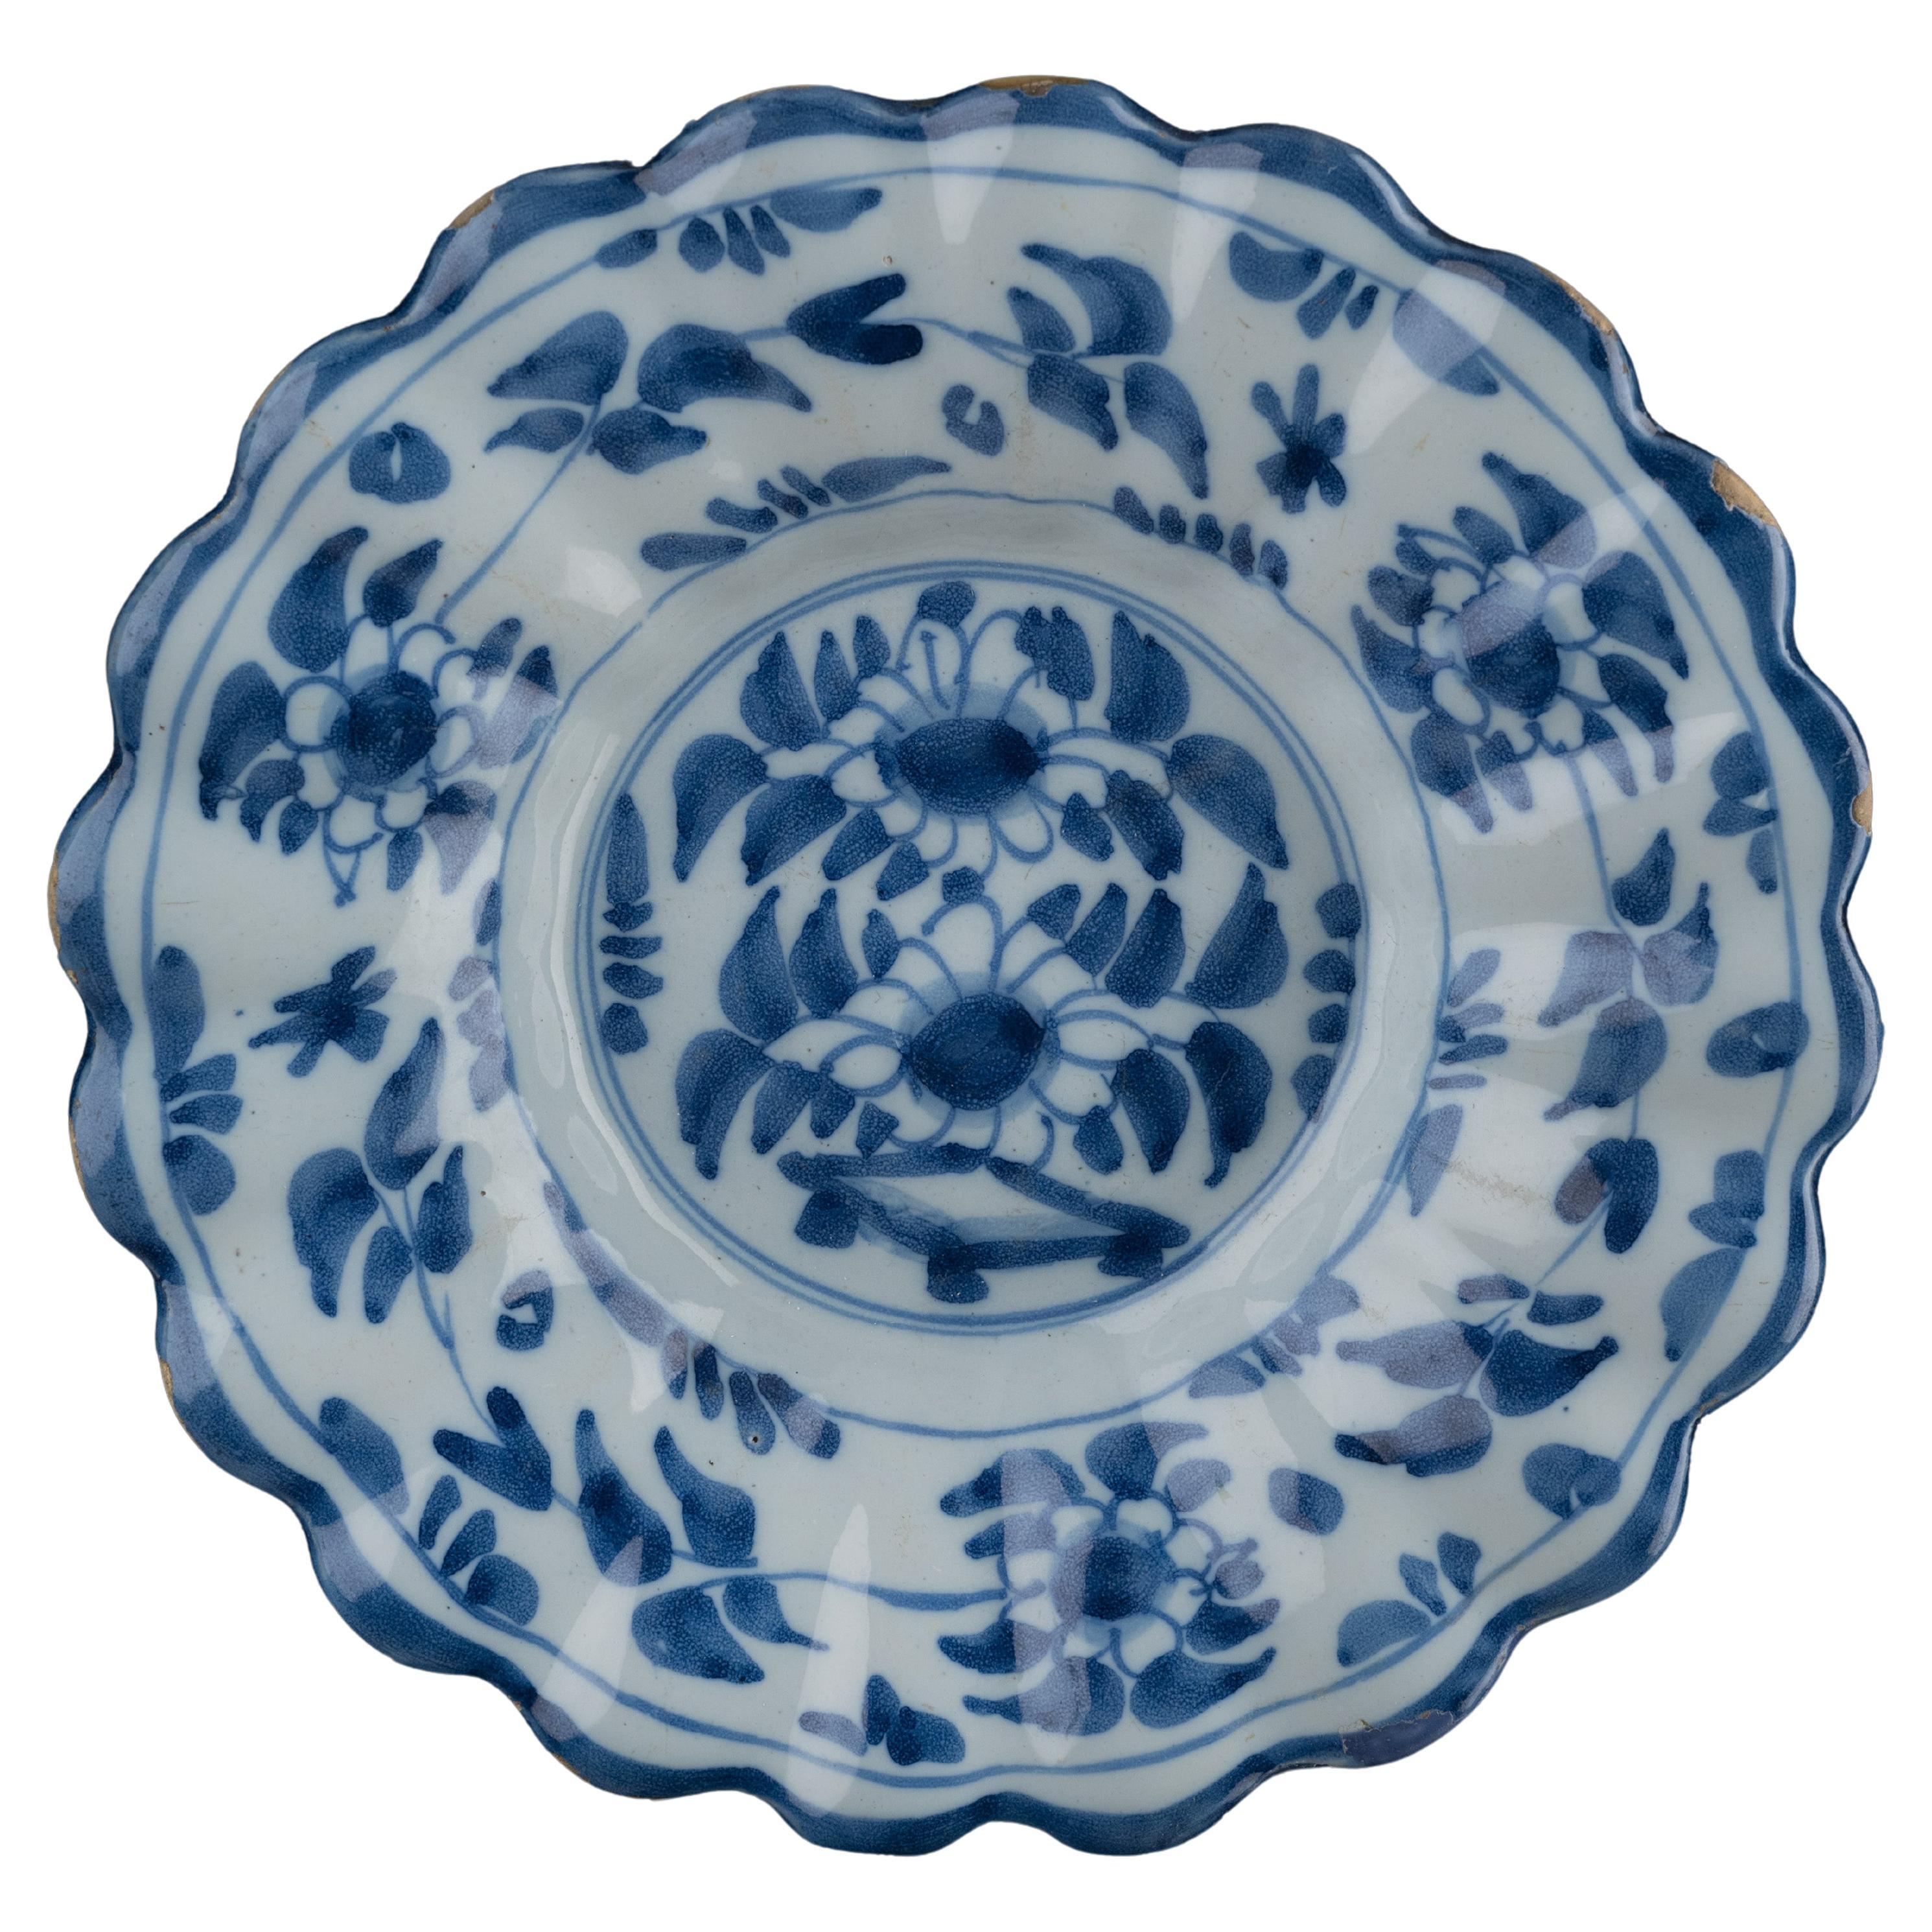 Delft Blue and white lobed dish with flowers  1670-1690 